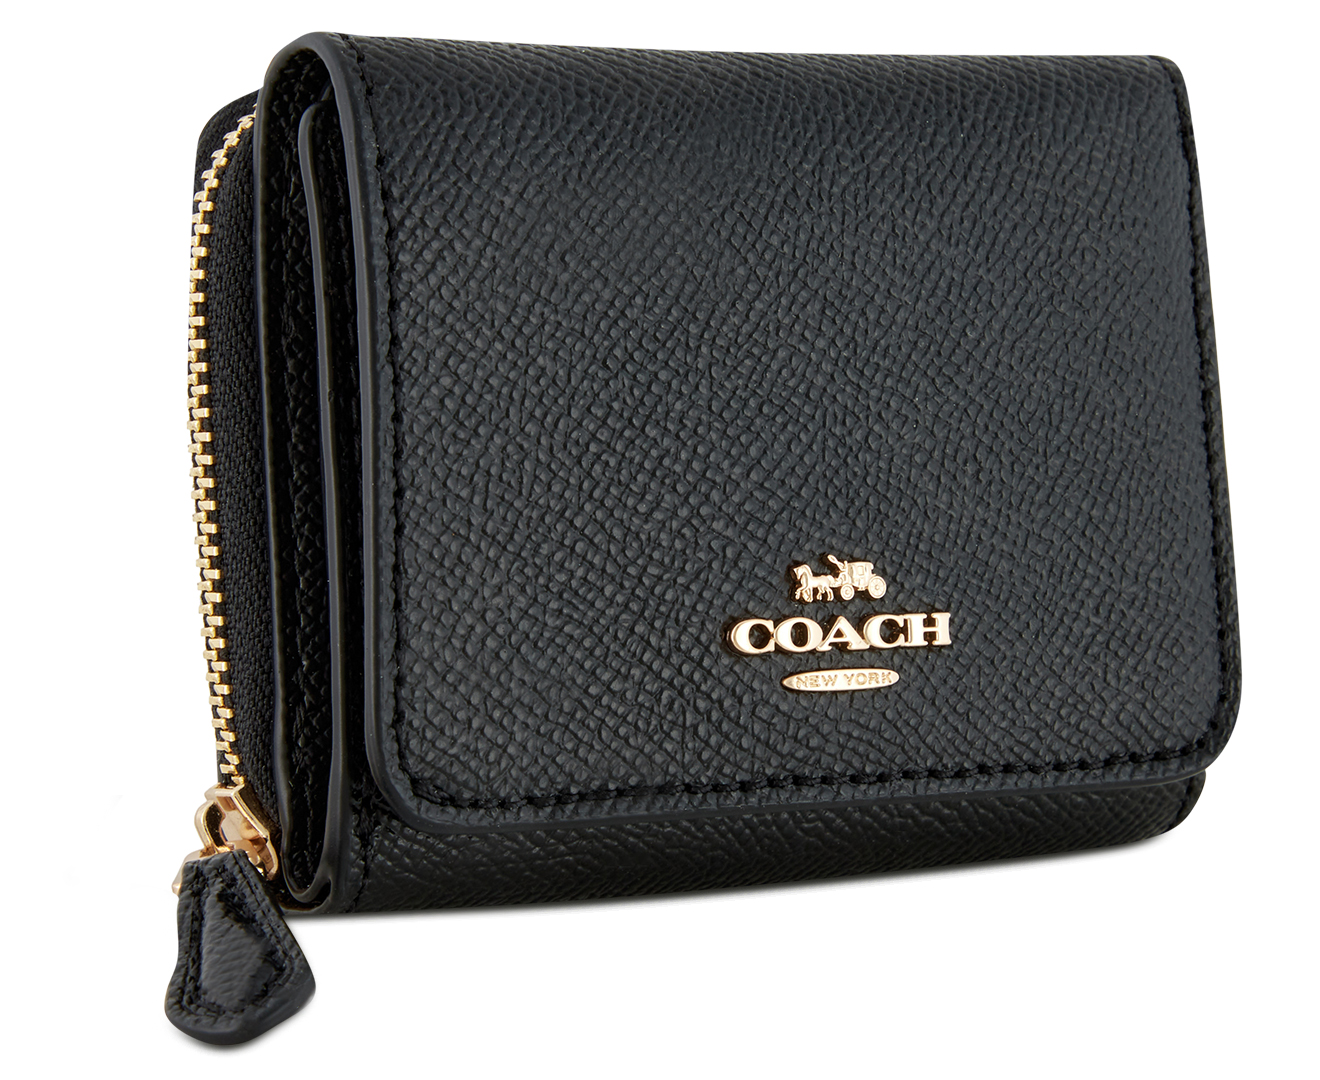 Coach Black Leather Trifold Compact Wallet Coach